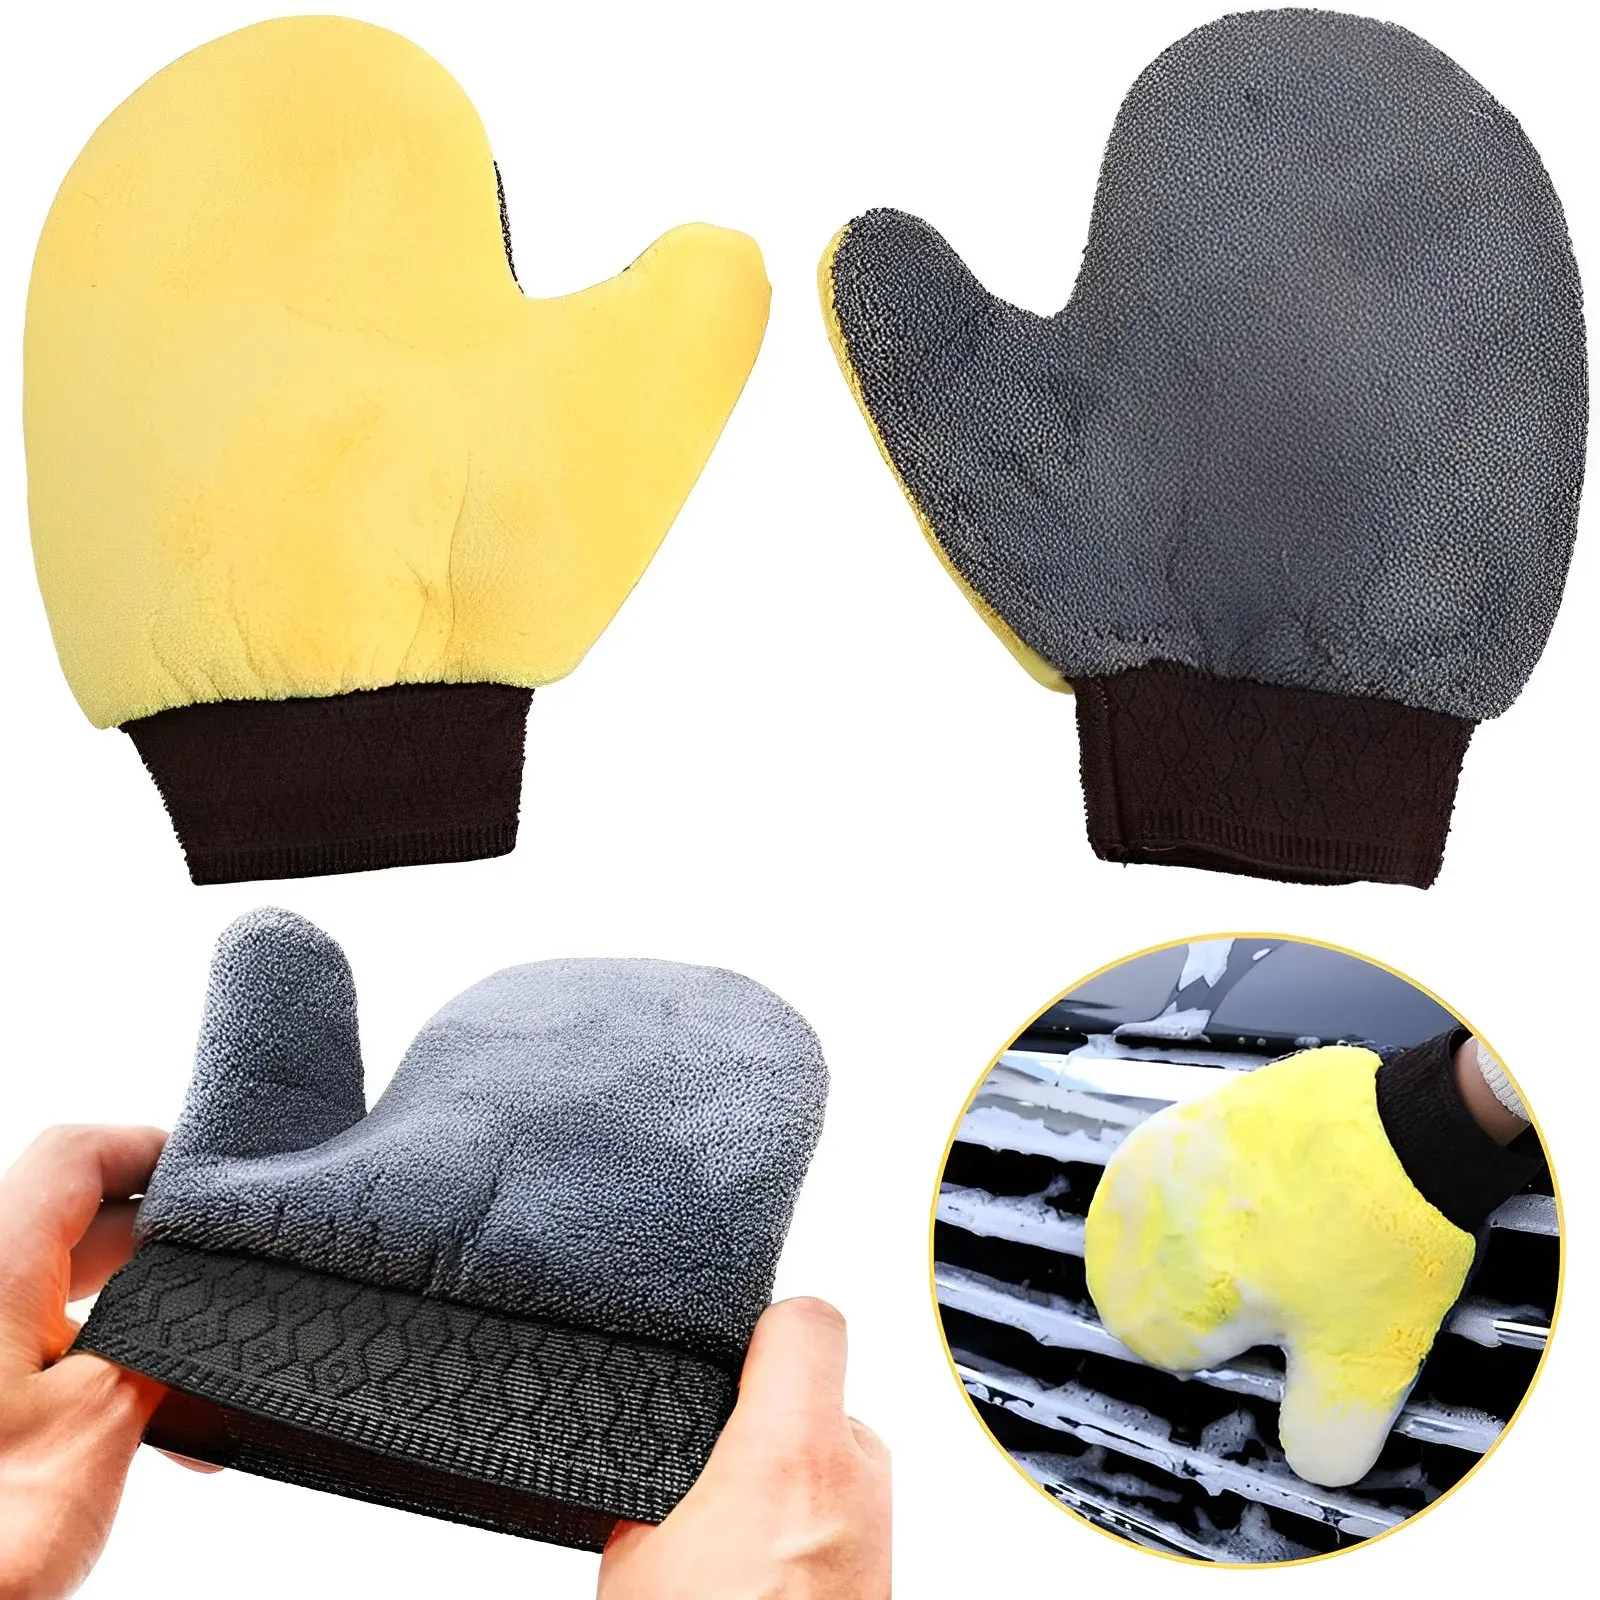 Gloves Car Cleaning Gloves Towel Soft Microfiber Chenille Water Absorption Car Body Washing Glove Duster Clearner Car Cleaning Tools